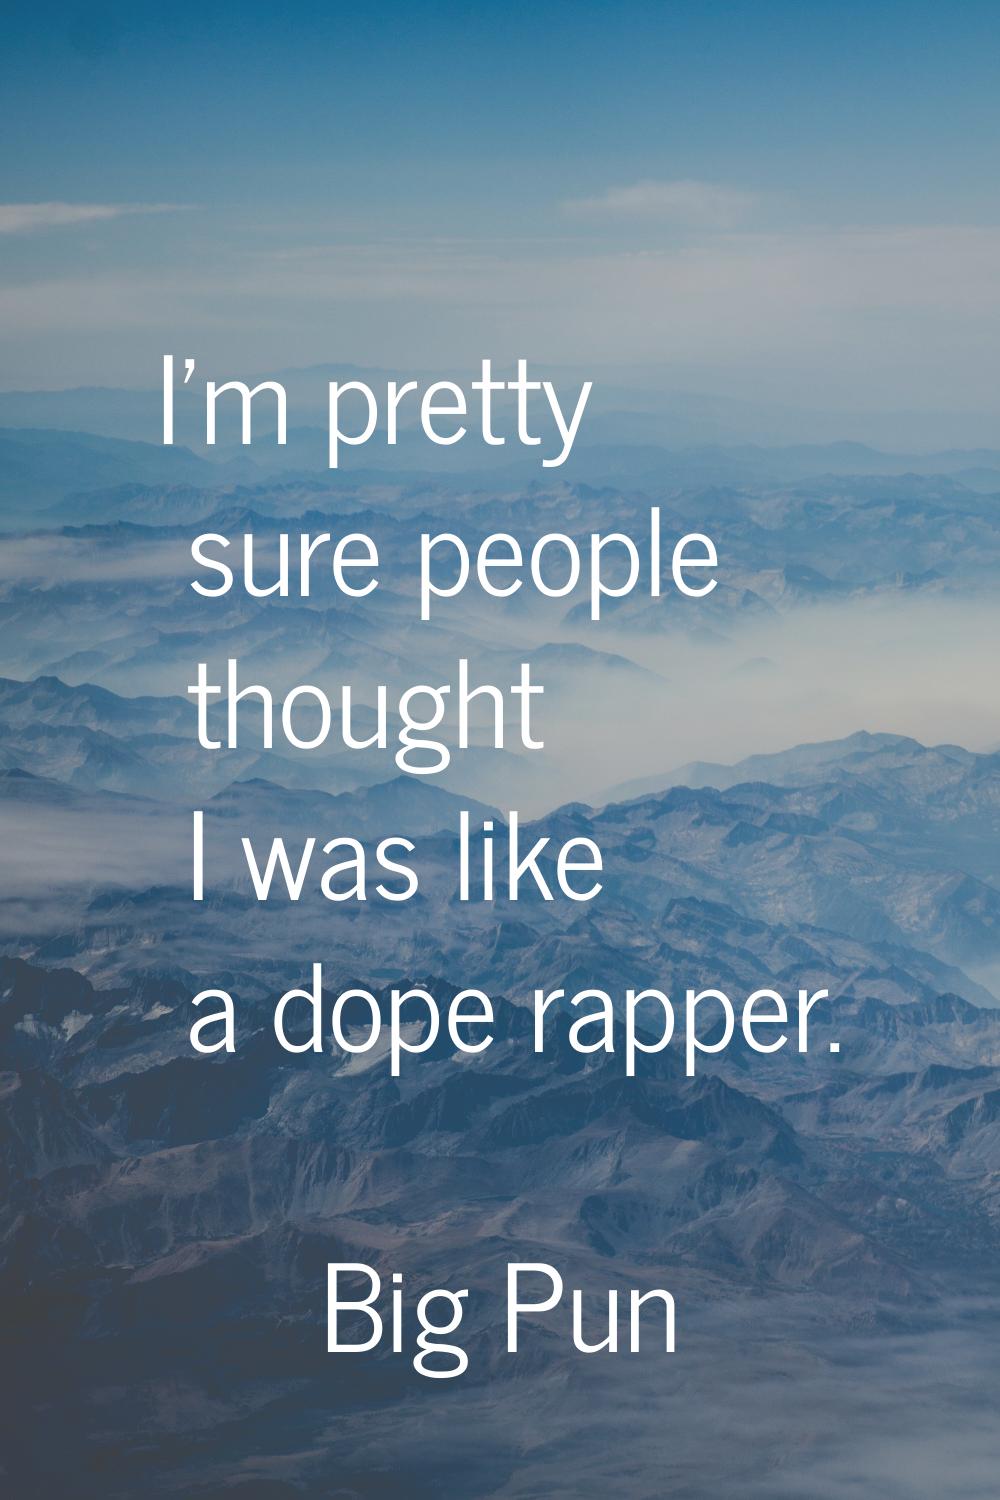 I'm pretty sure people thought I was like a dope rapper.